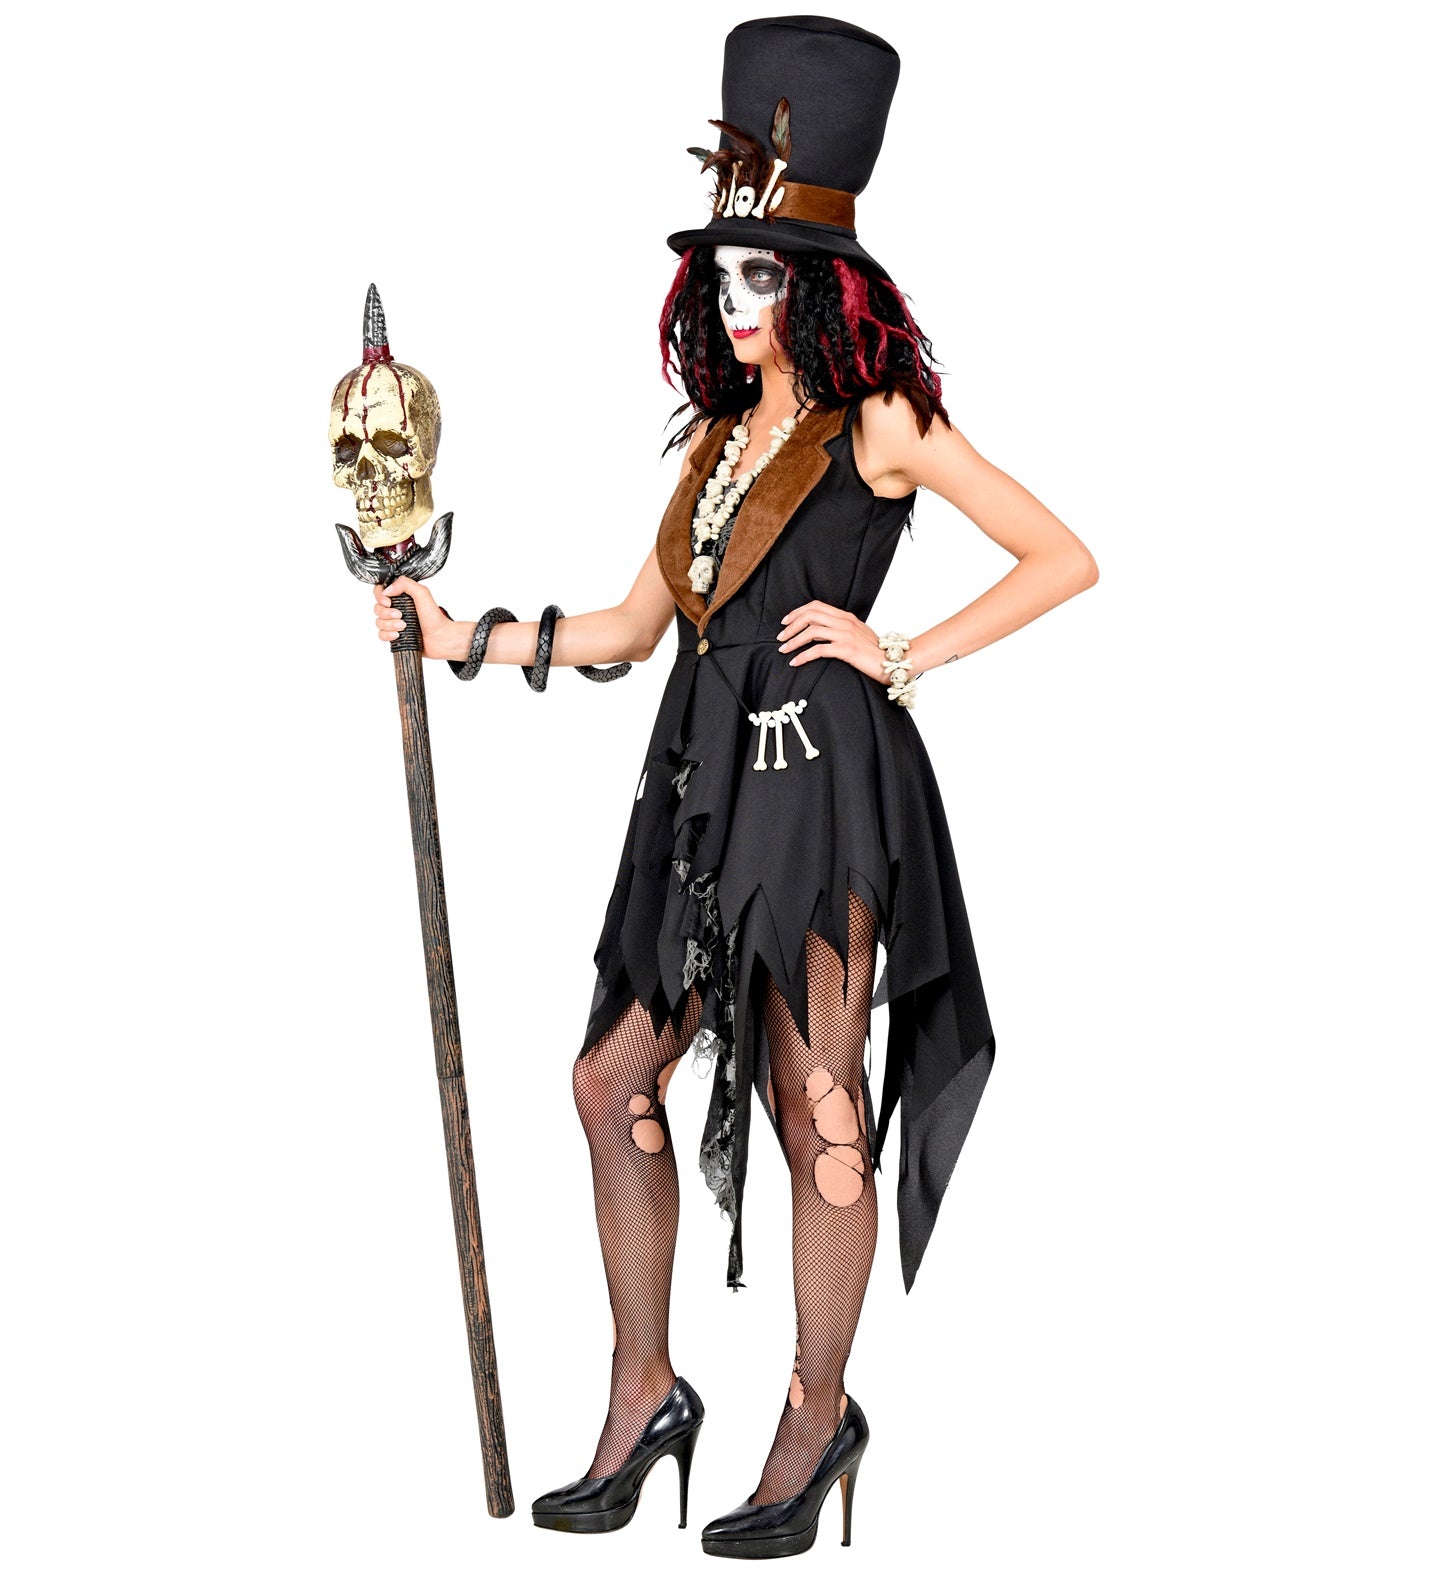 Voodoo Magic Priestess Costume outfit